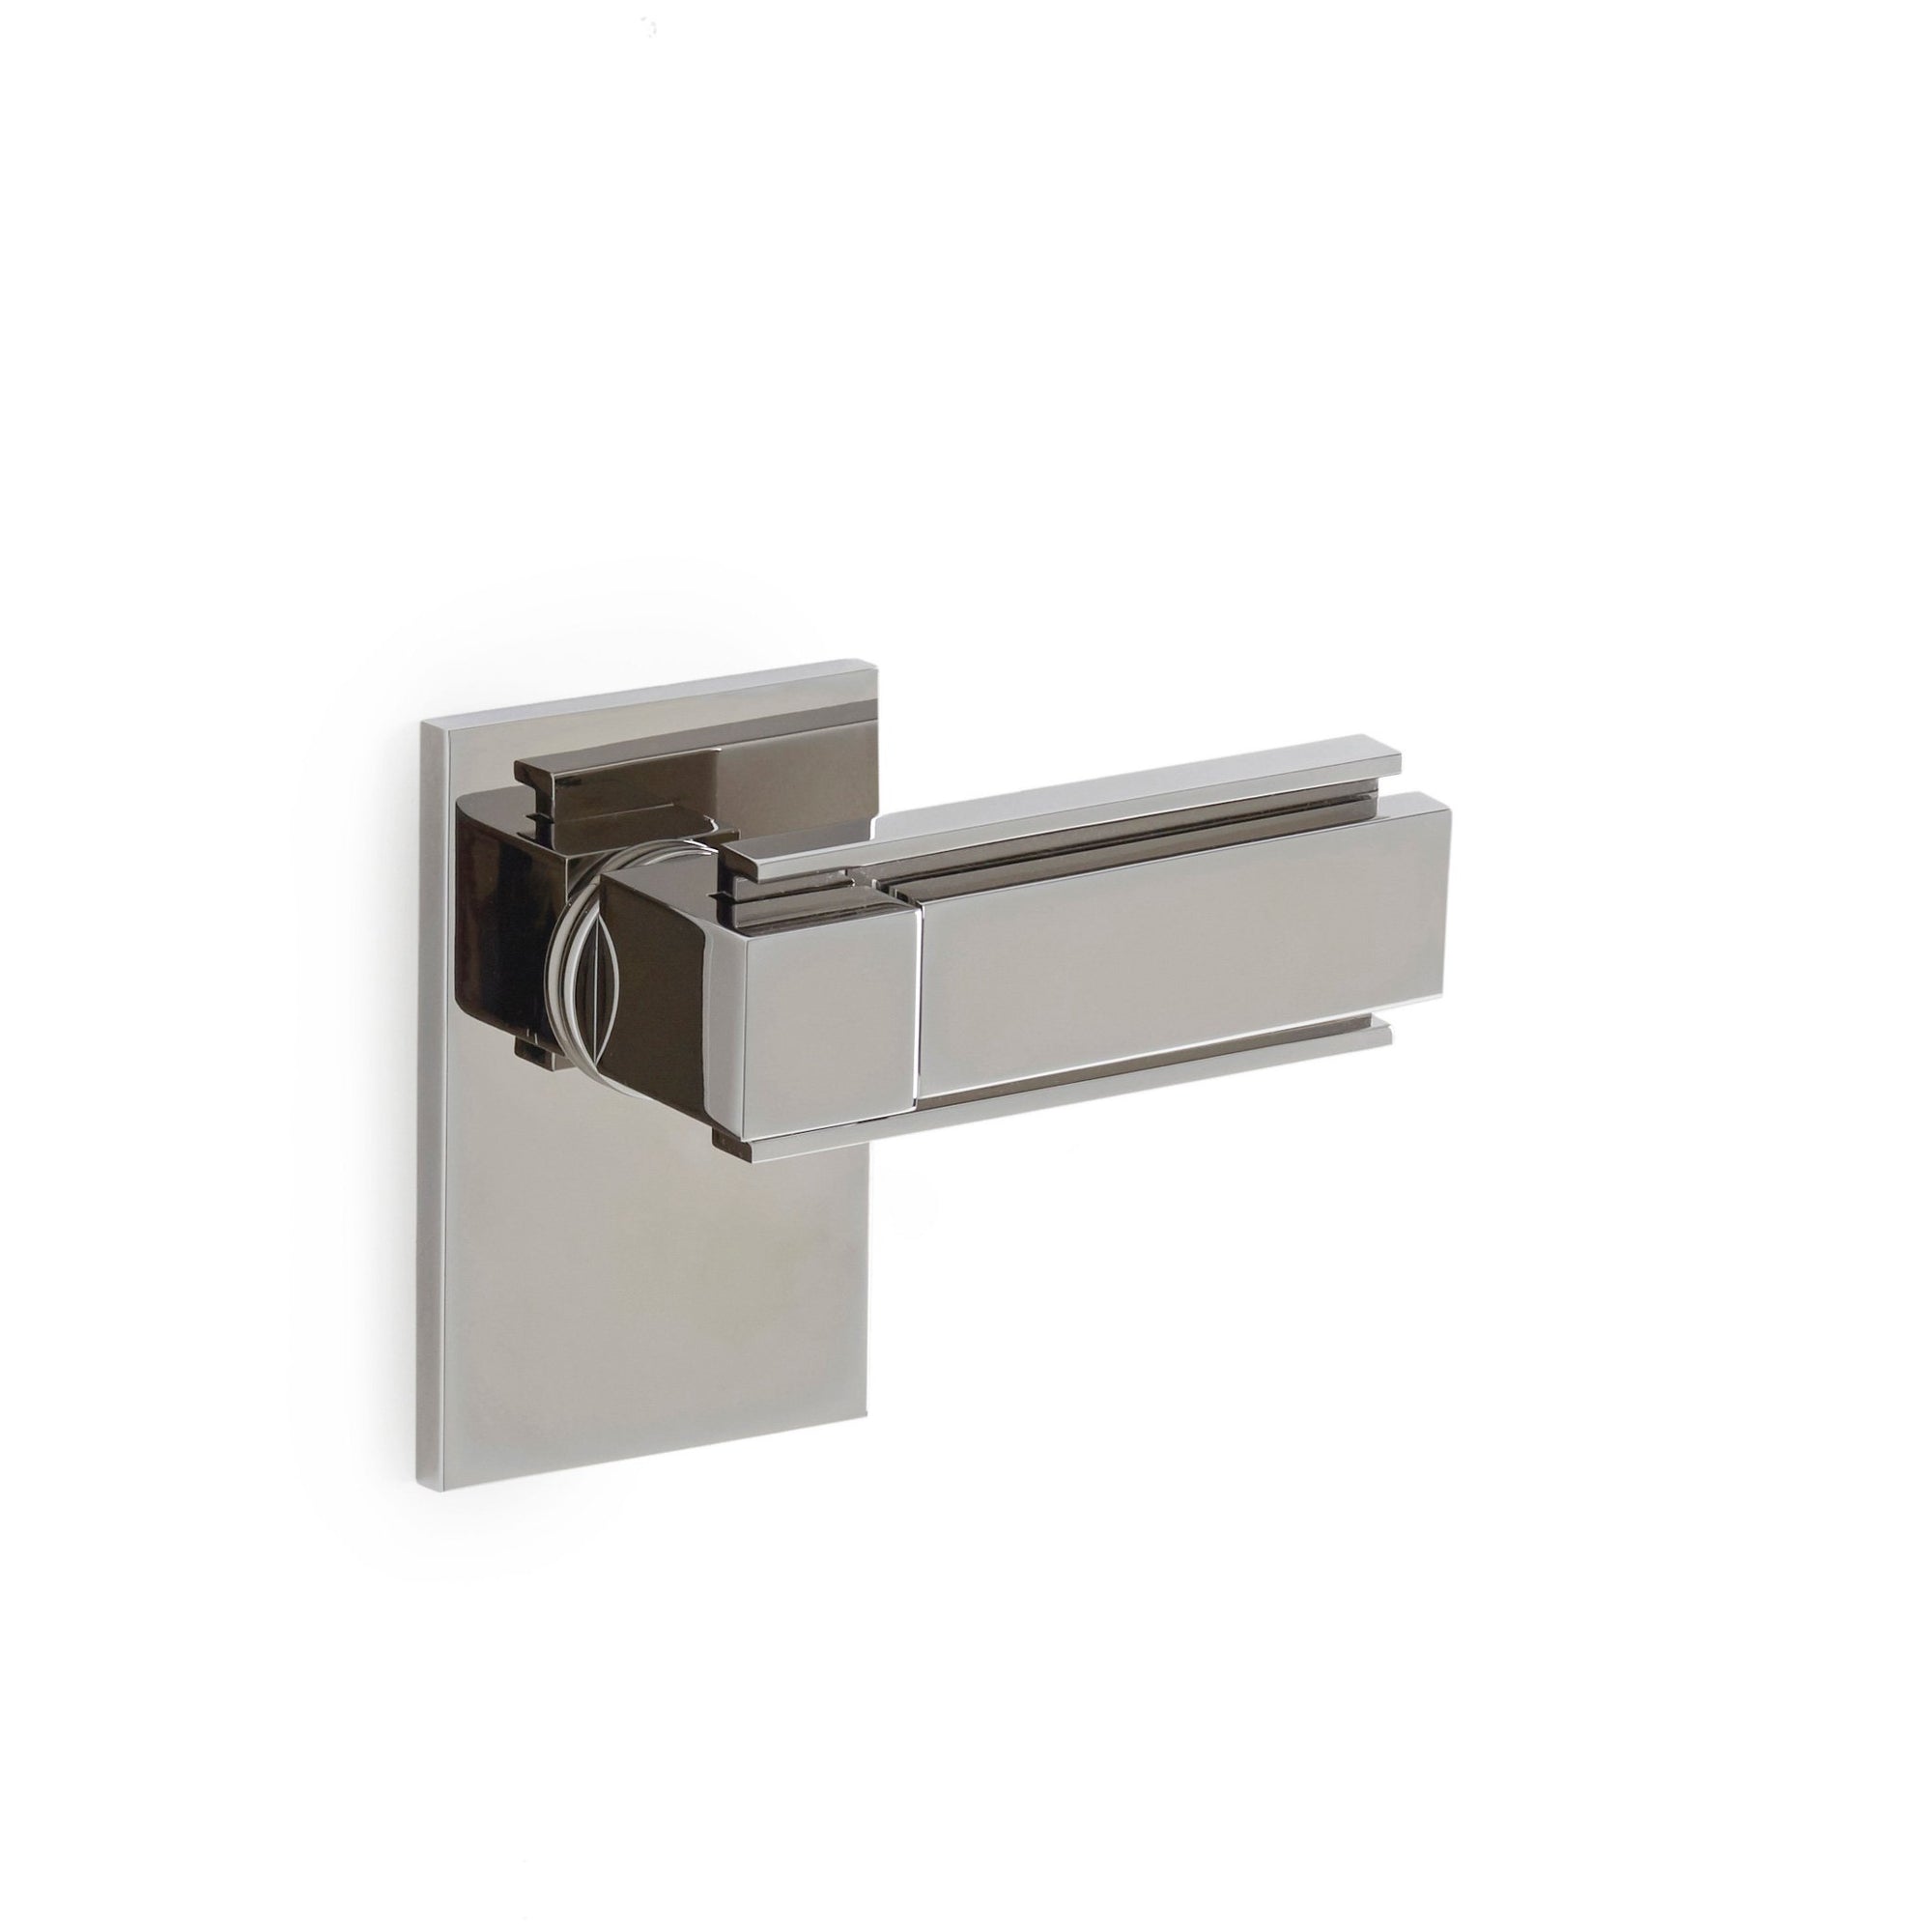 2020DOR-RH-CP Sherle Wagner International Apollo Door Lever in Polished Chrome metal finish